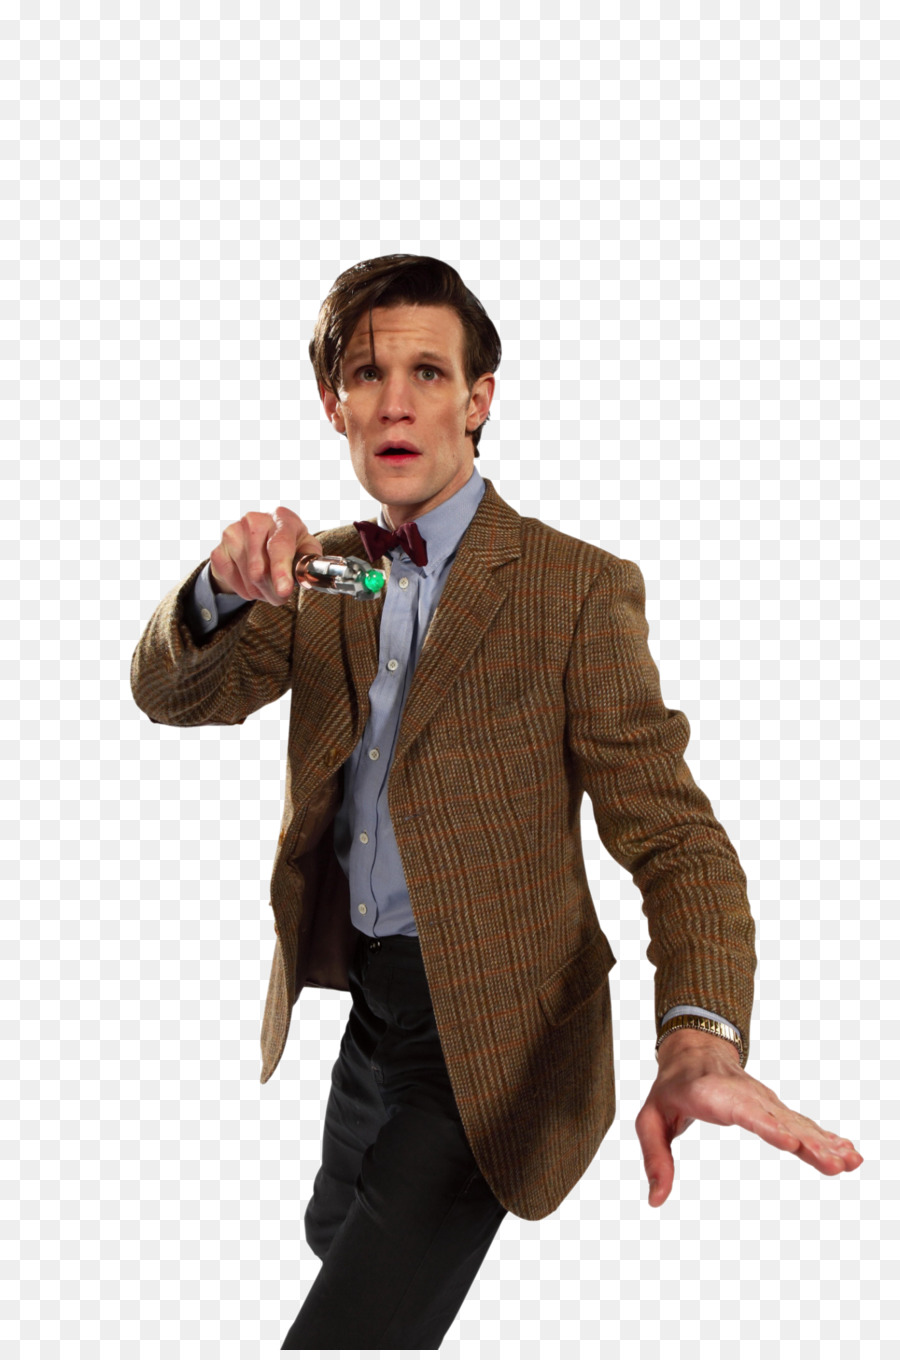 Eleventh Doctor Rory Williams Amy Pond Doctor Who - The Doctor PNG File png download - 900*1350 - Free Transparent Doctor png Download.